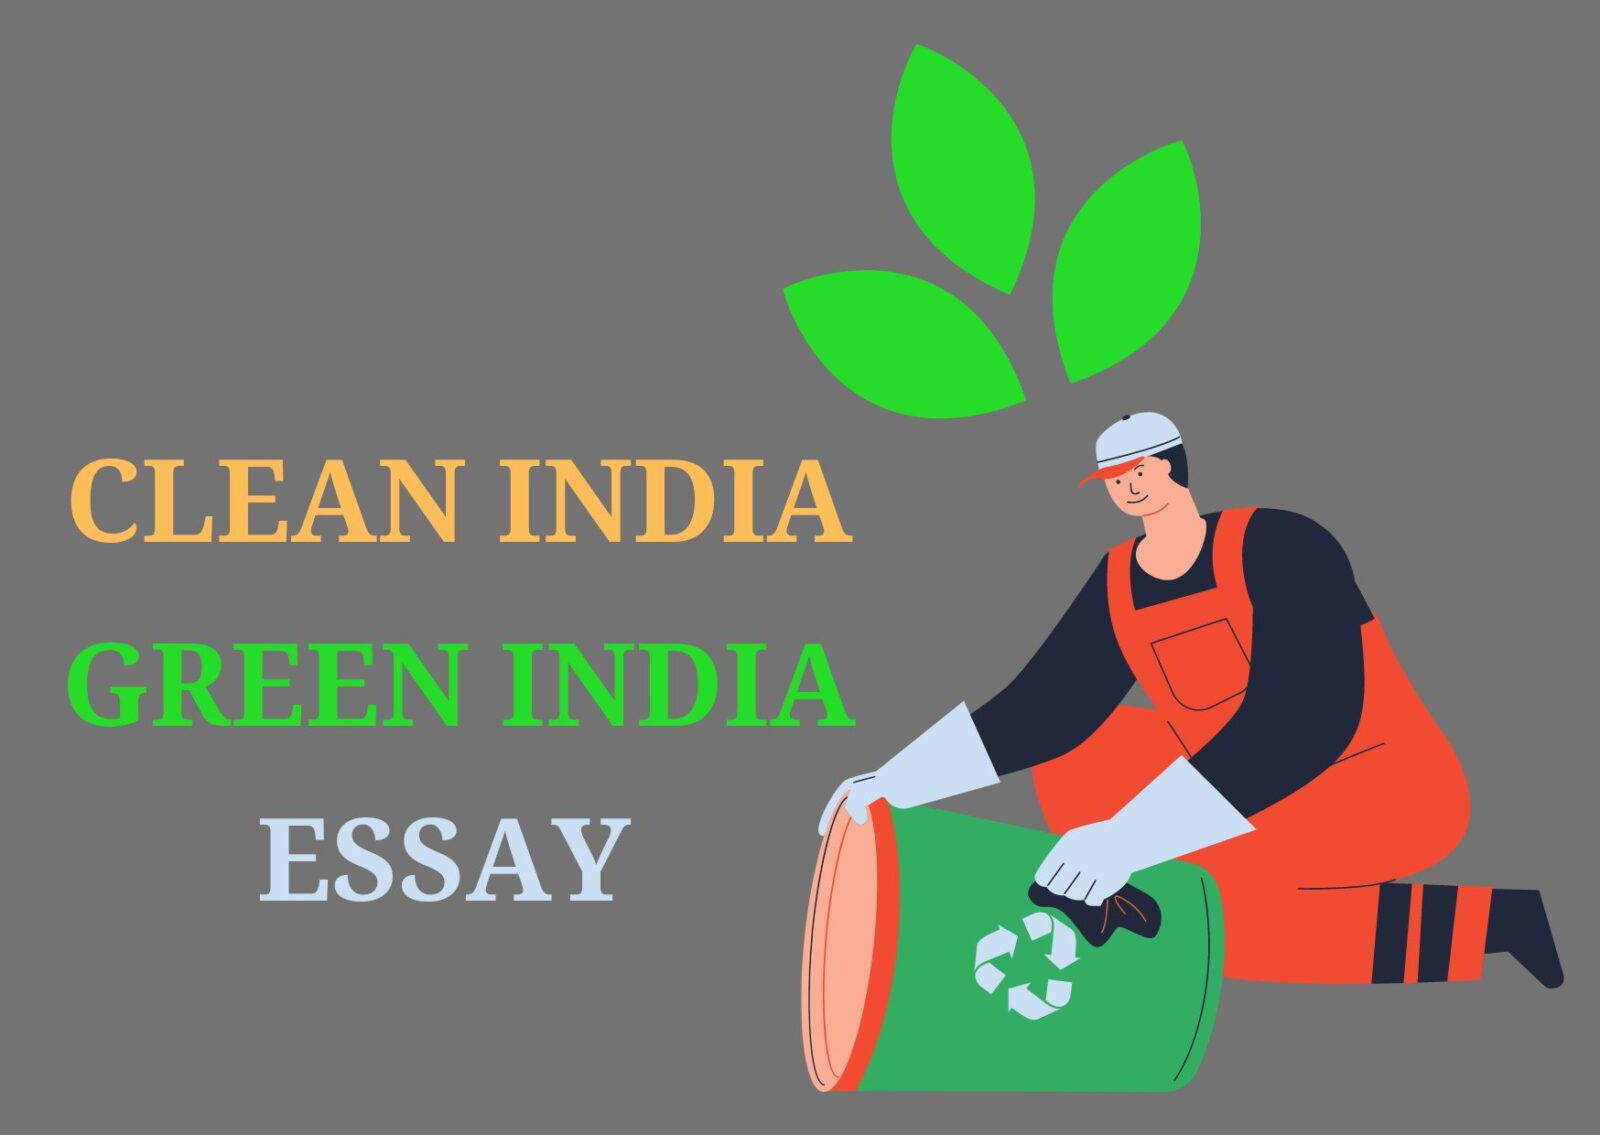 essay on clean india green india of 150 words